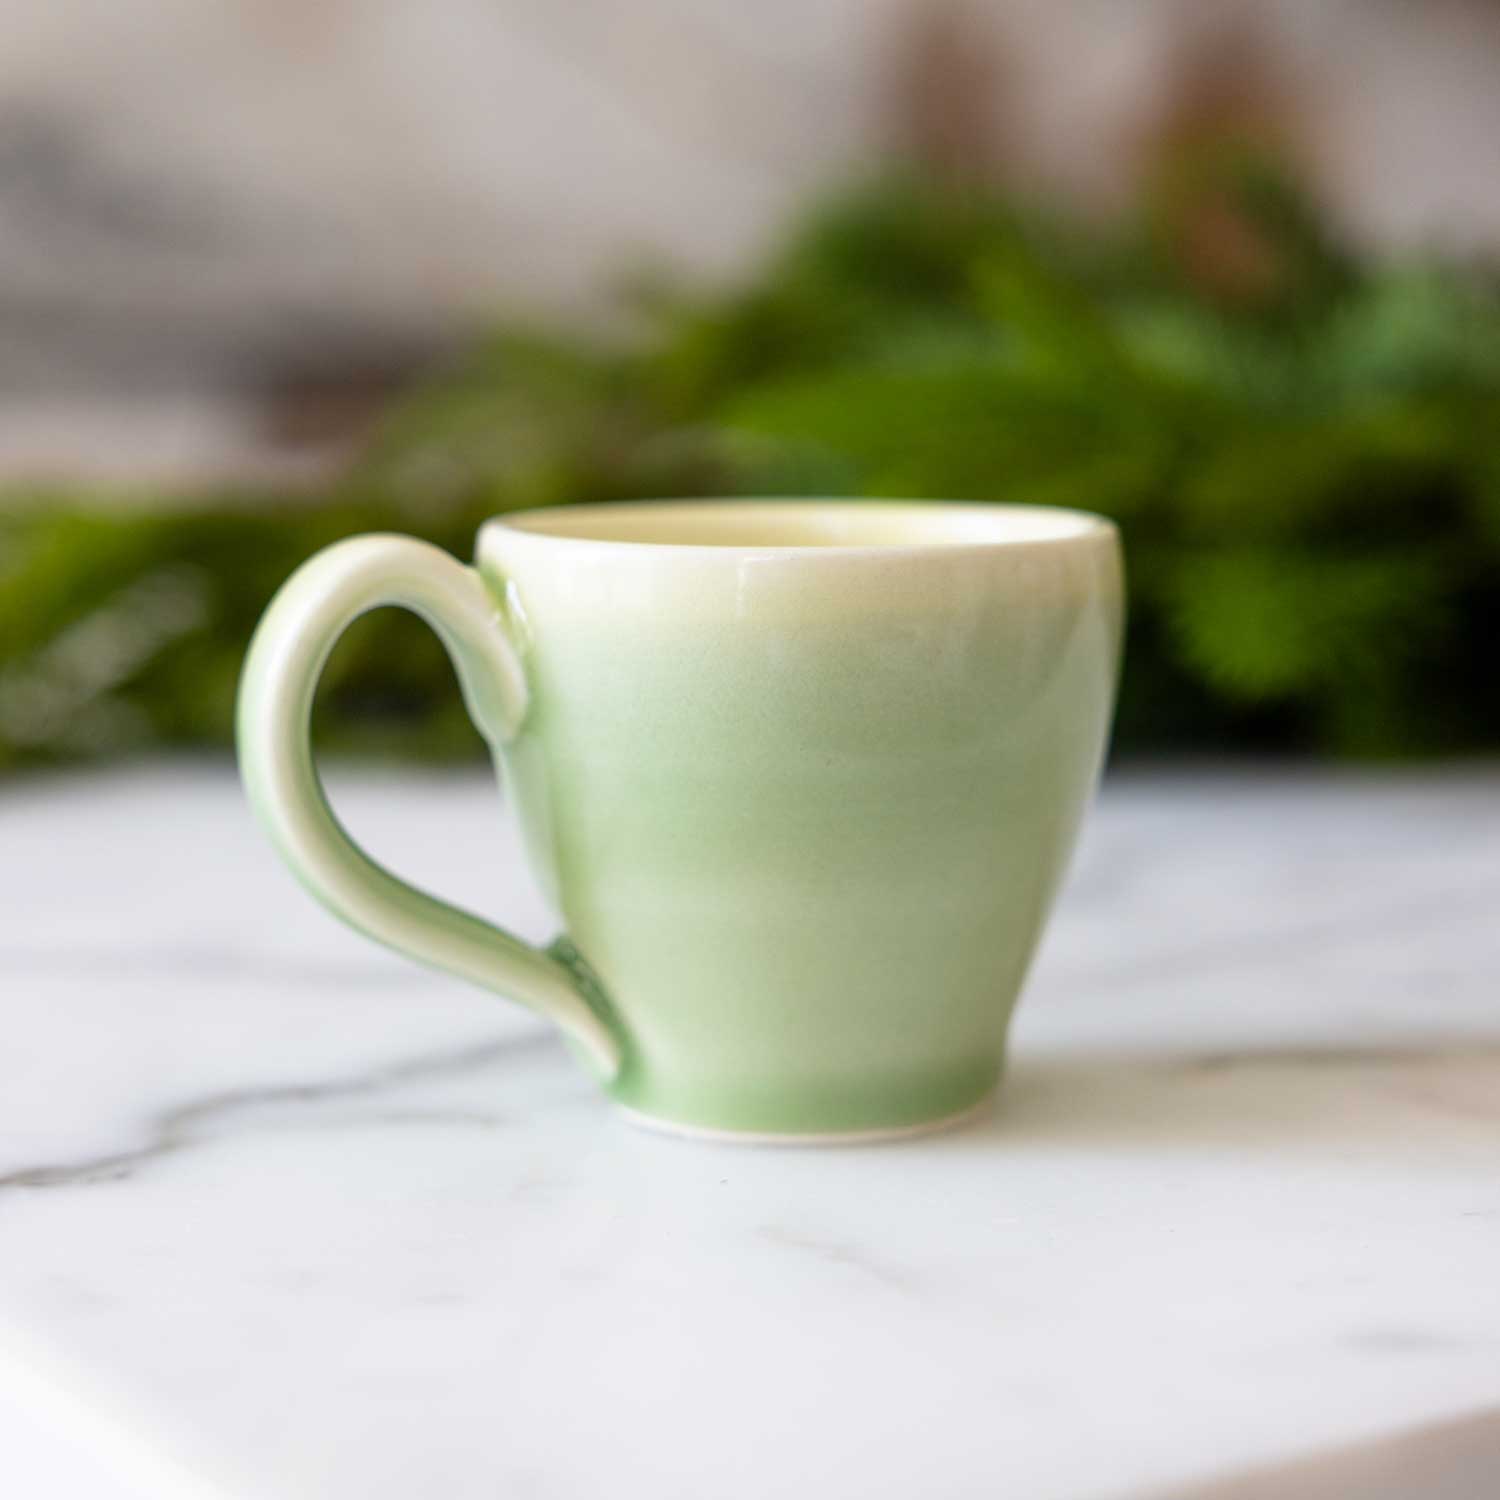 Thomas Aitken: Green Espresso Cup Product Image 1 of 5